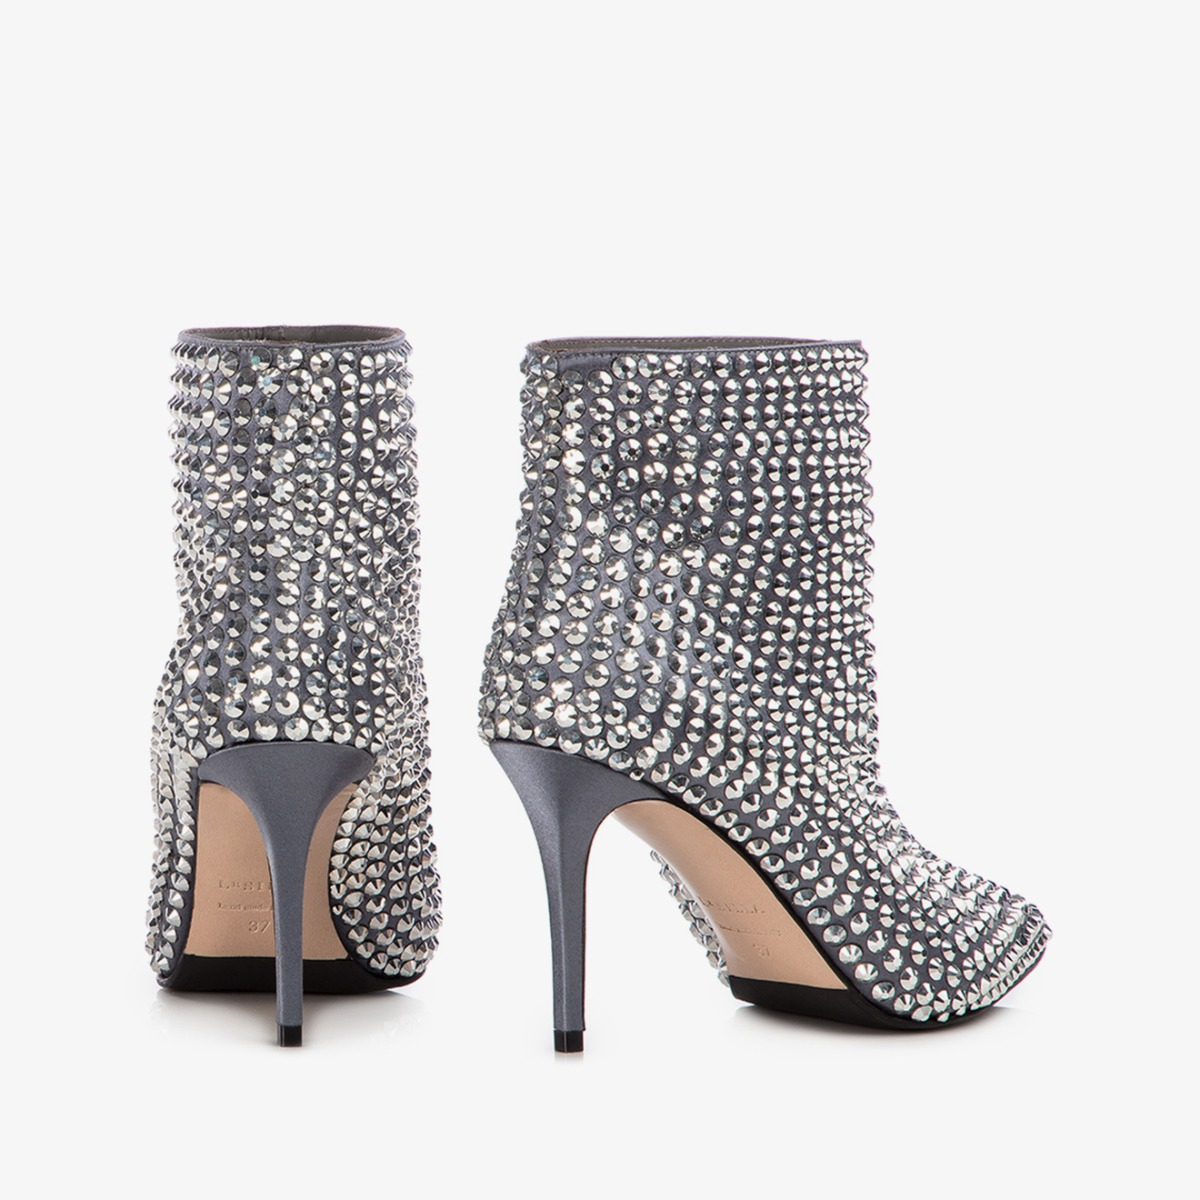 EVA ANKLE BOOT 80 mm - Le Silla official outlet